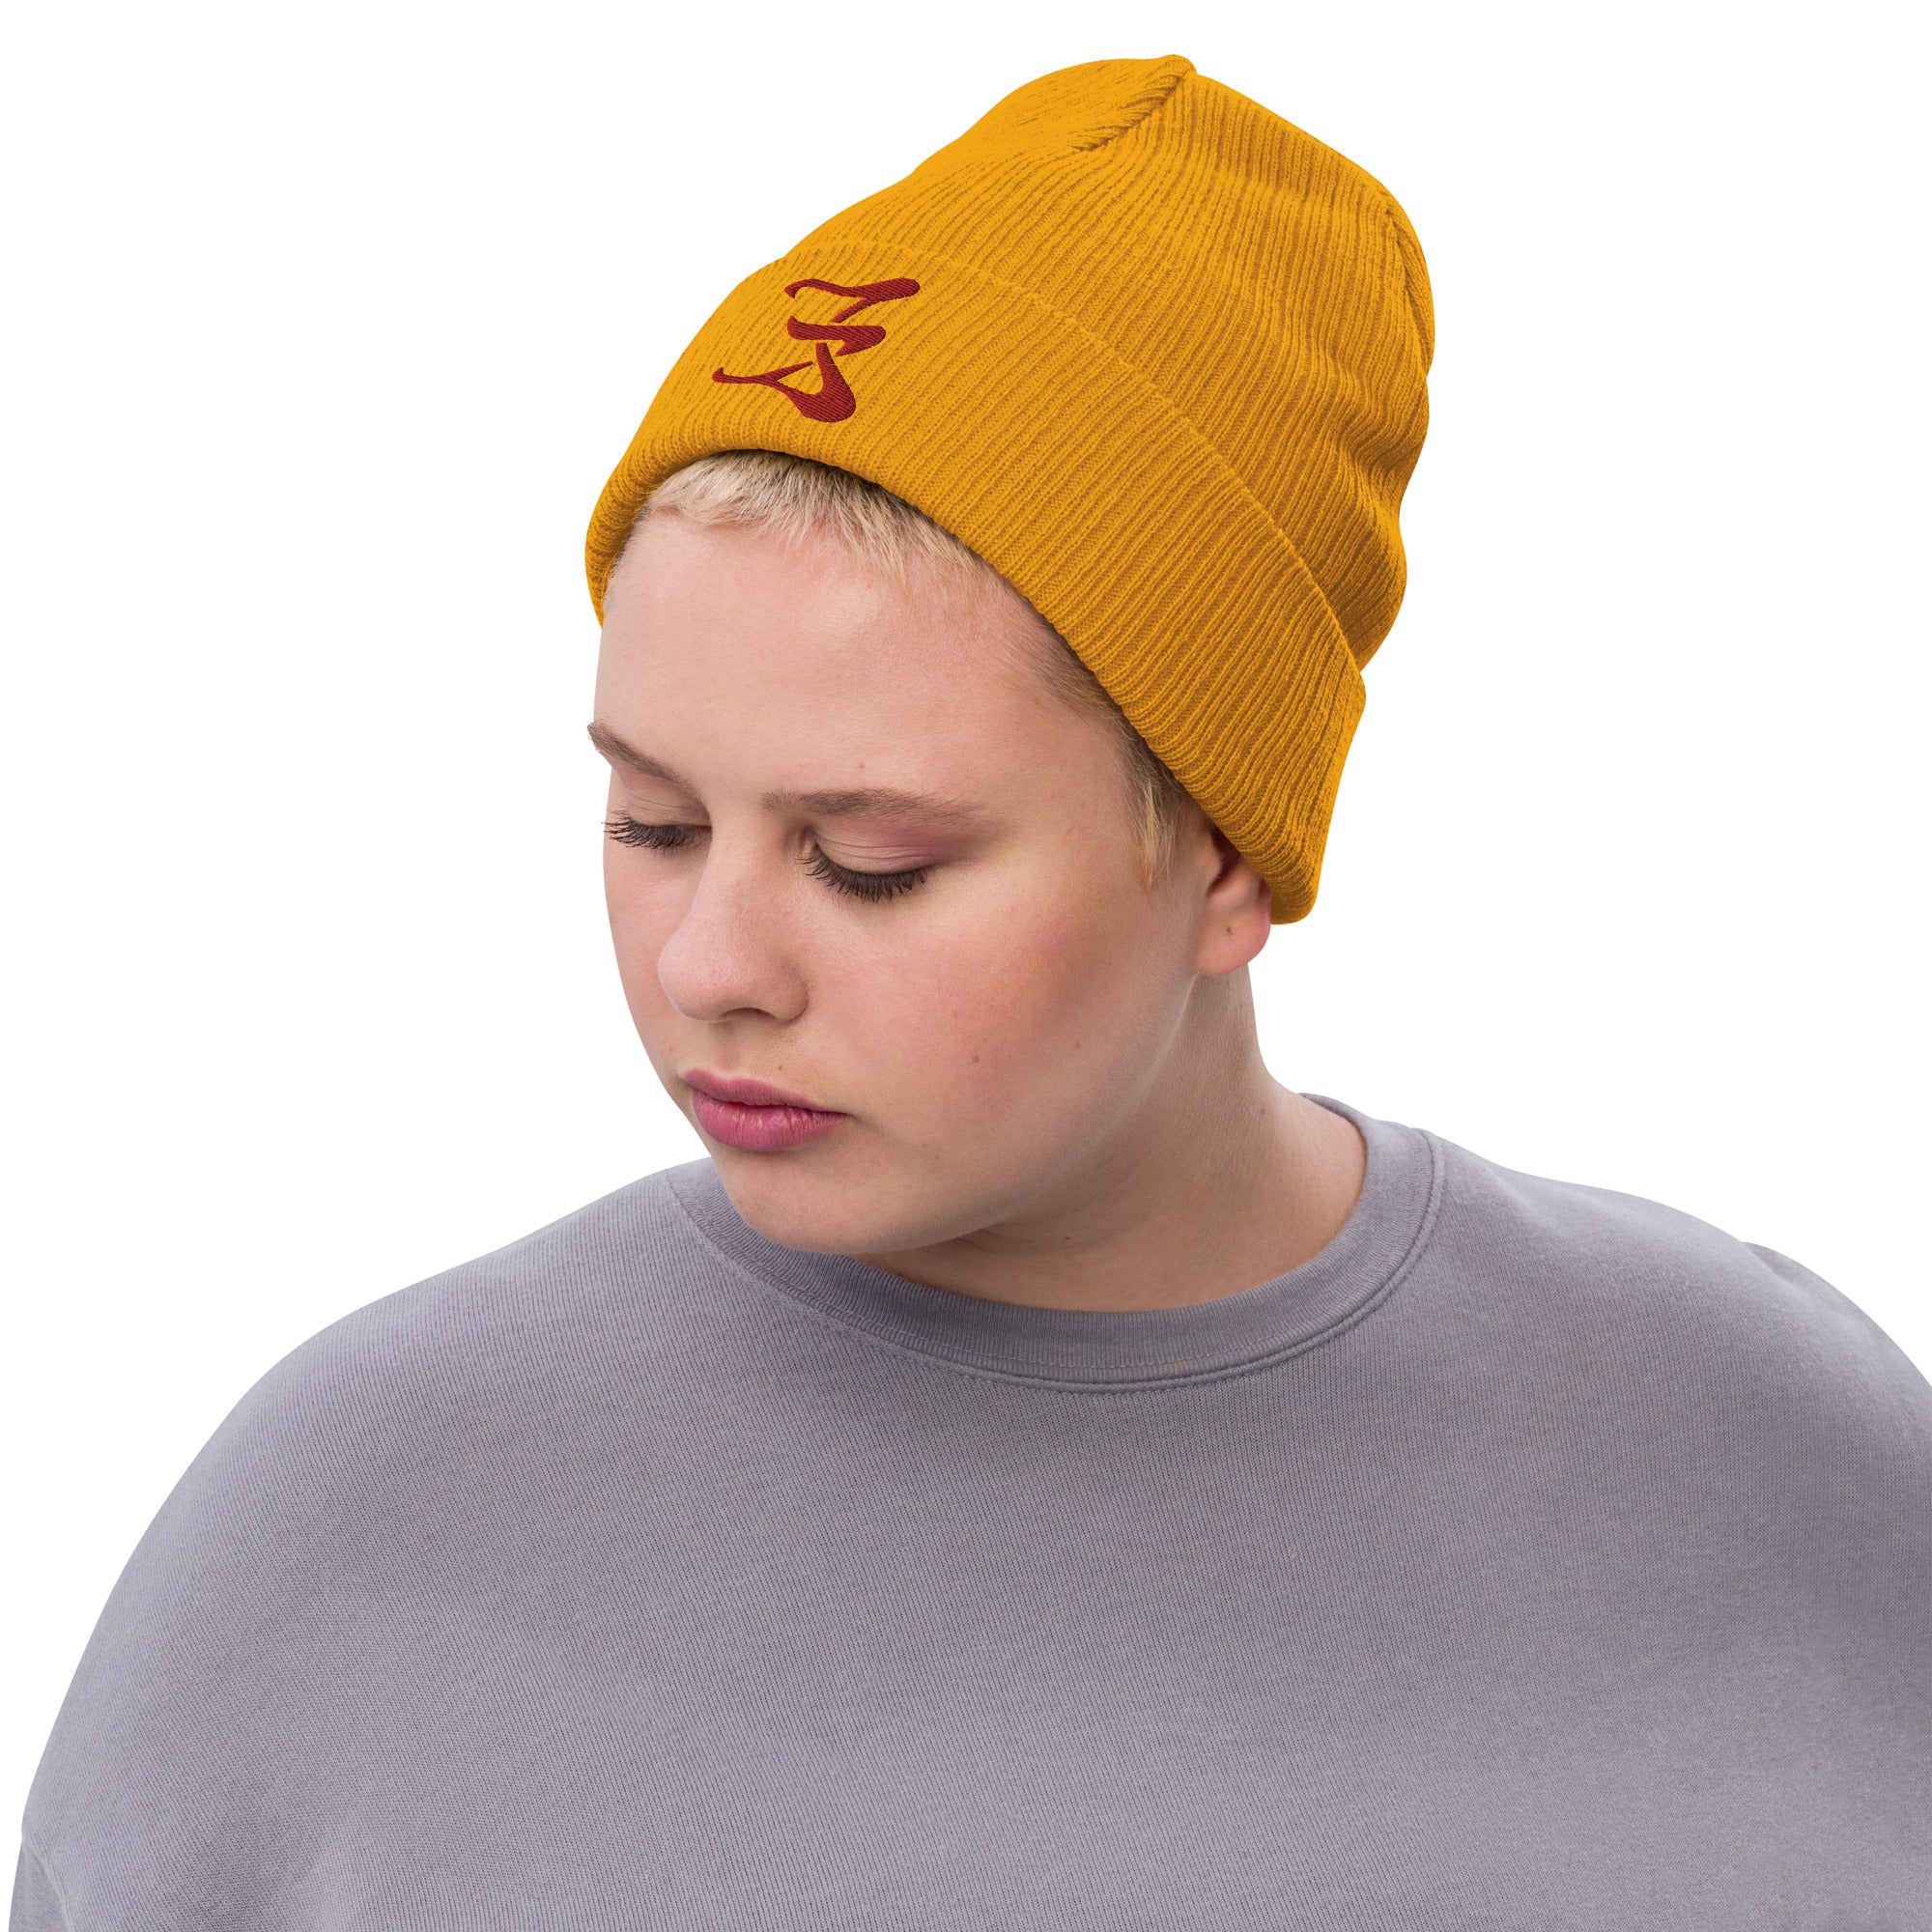 Ribbed knit beanie red logo #1